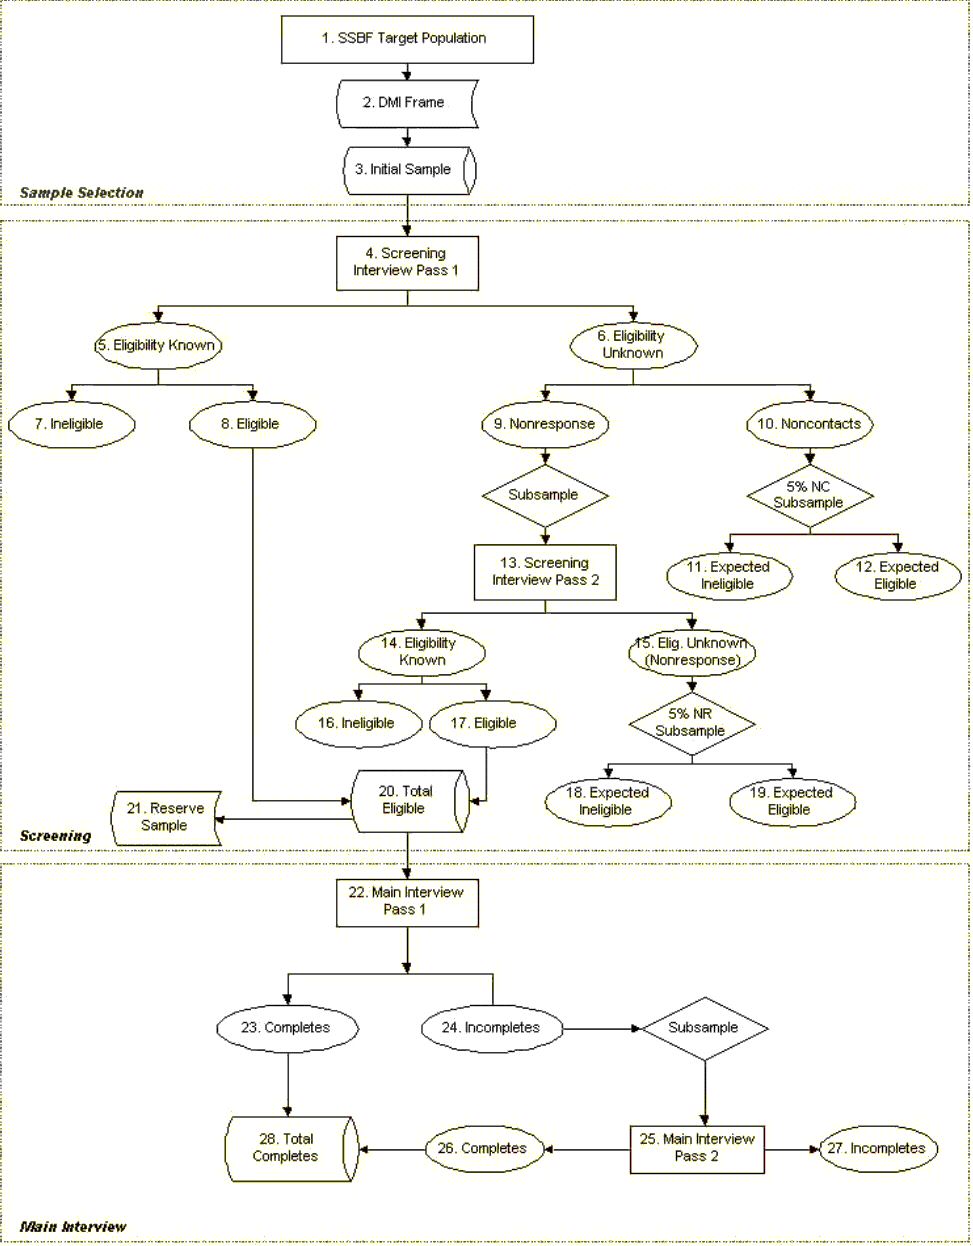 Figure 6.1 2003 SSBF Sampling Flowchart
The figure depicts the steps involved in the survey, from the initial step of sample selection, to the screening interview, to the main interview.